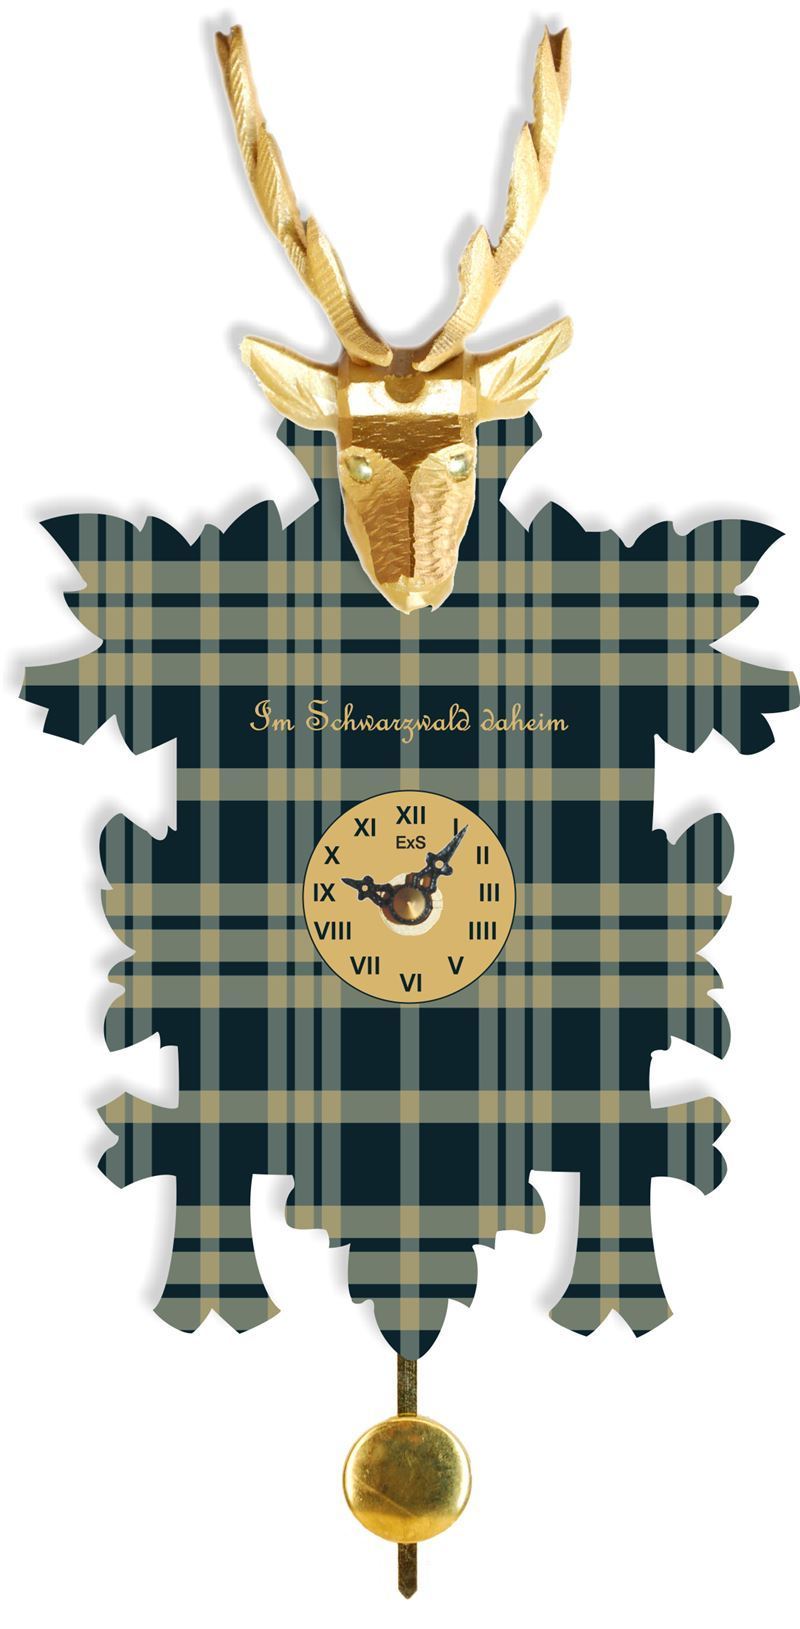 Cuckoo Clock - Hermle HAMISH Quartz Time Only Whimisical Black Forest Cuckoo Styled Clock, Model 67000